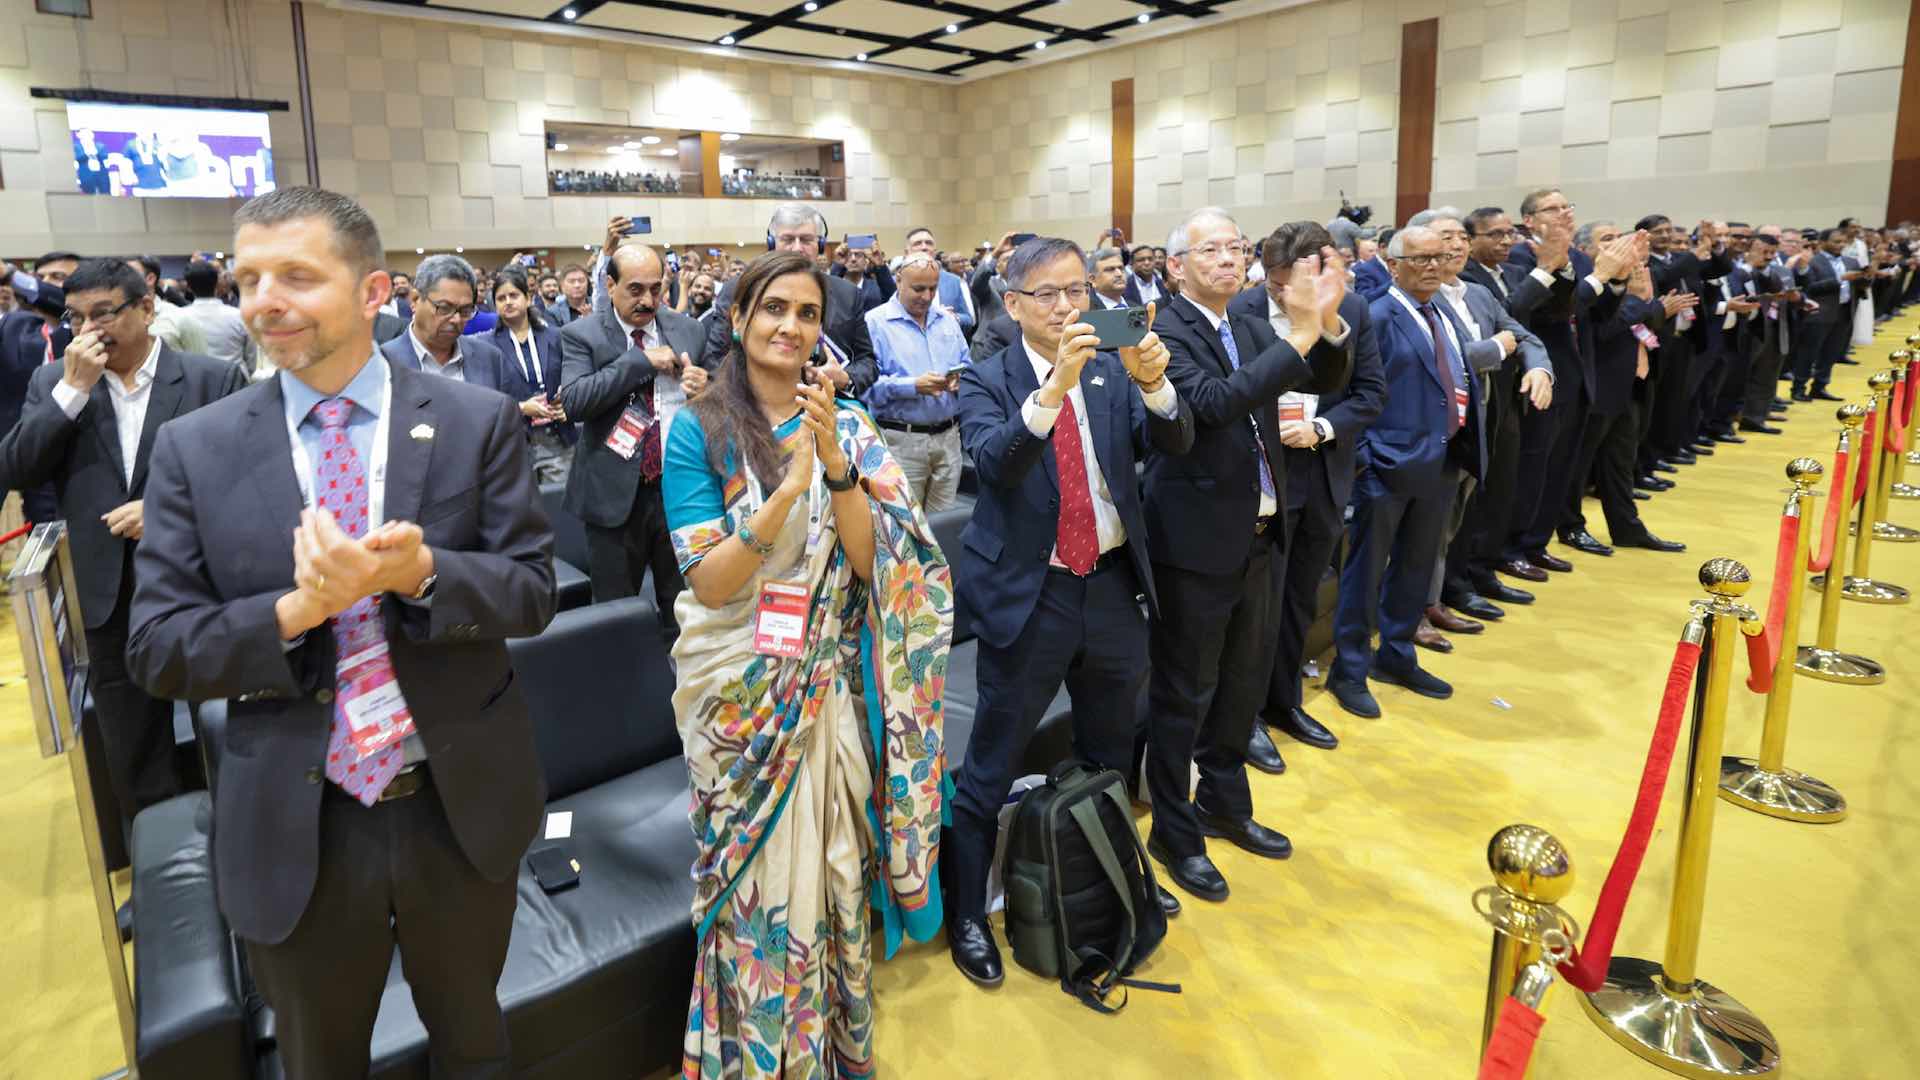 PM Modi gets a standing ovation from global semiconductor industry professionals at the Semicon India 23 conclave